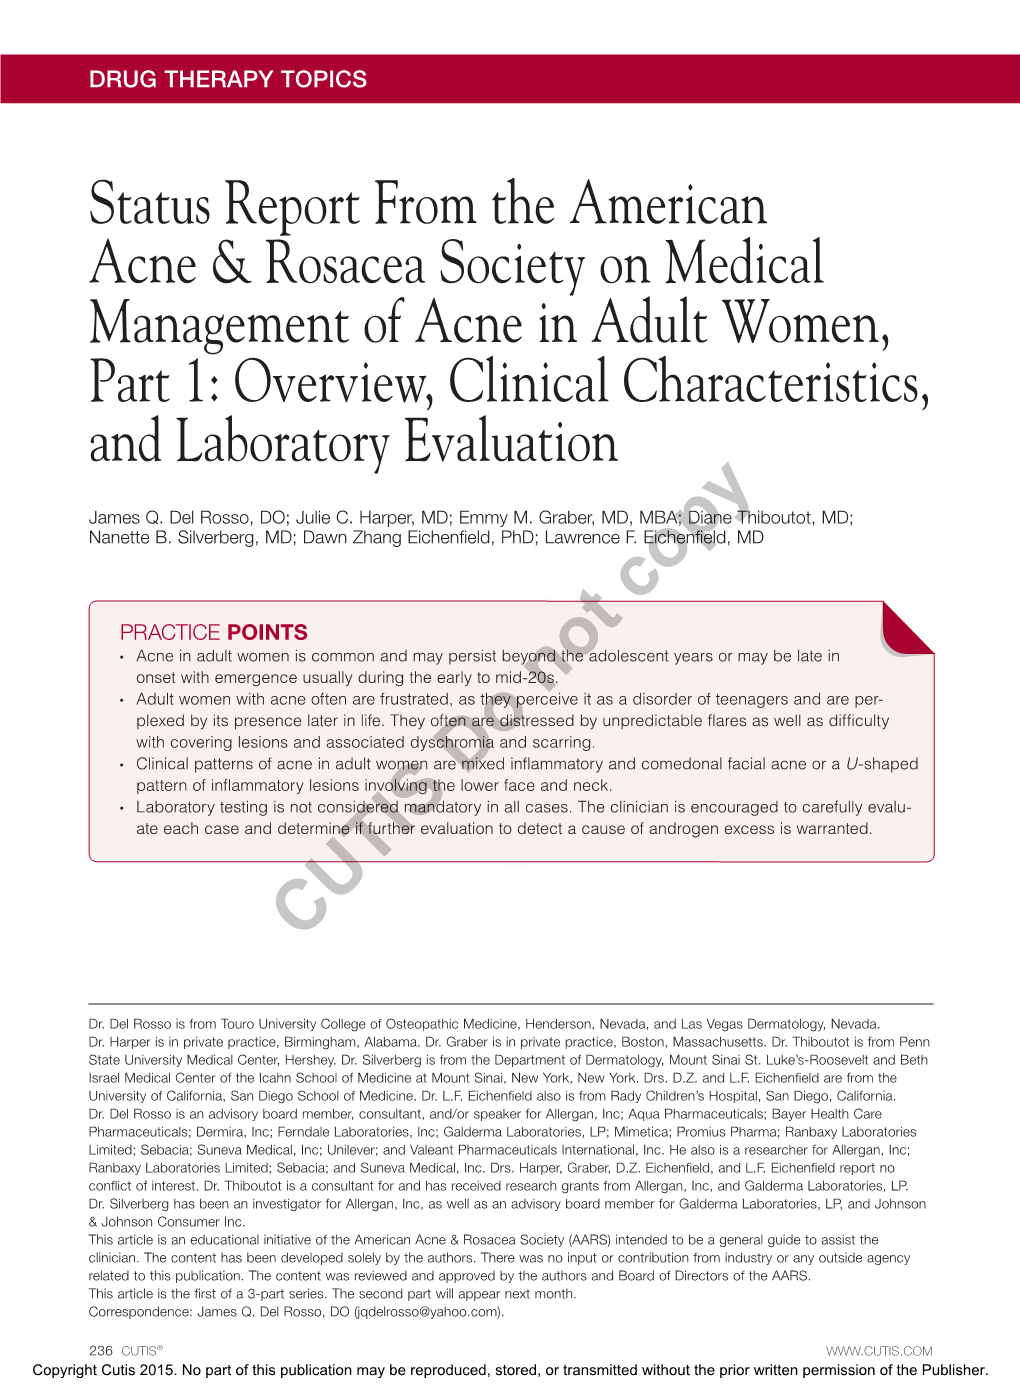 Status Report from the American Acne & Rosacea Society